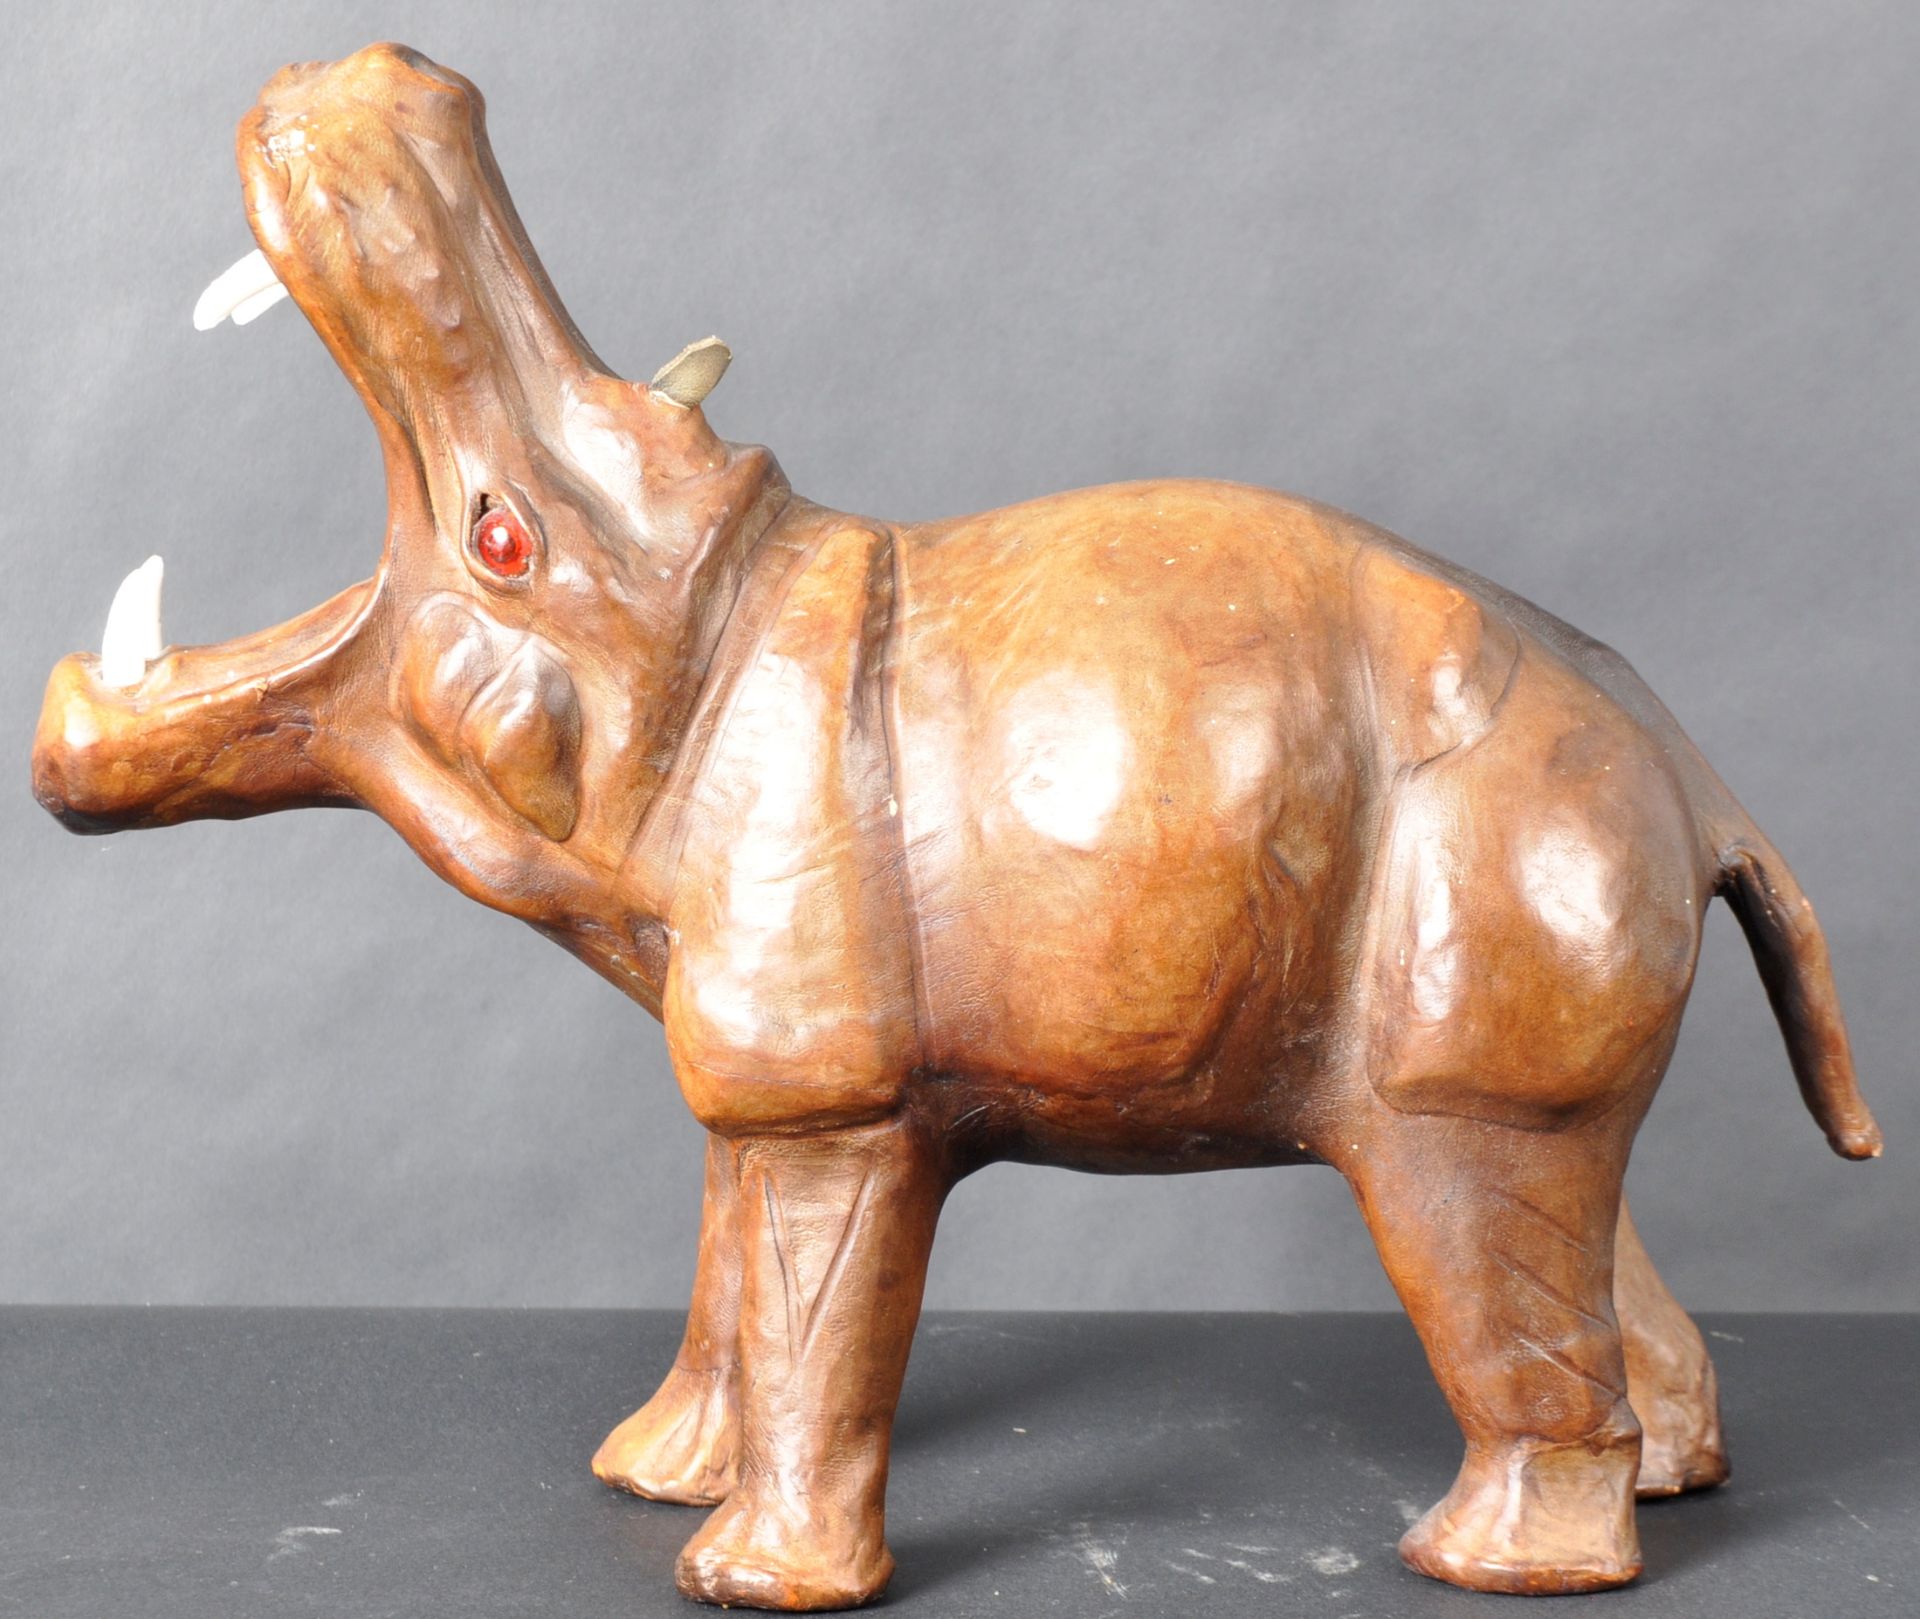 LIBERTY OF LONDON MANNER LEATHER HIPPOPOTAMUS ORNAMENT - Image 3 of 5